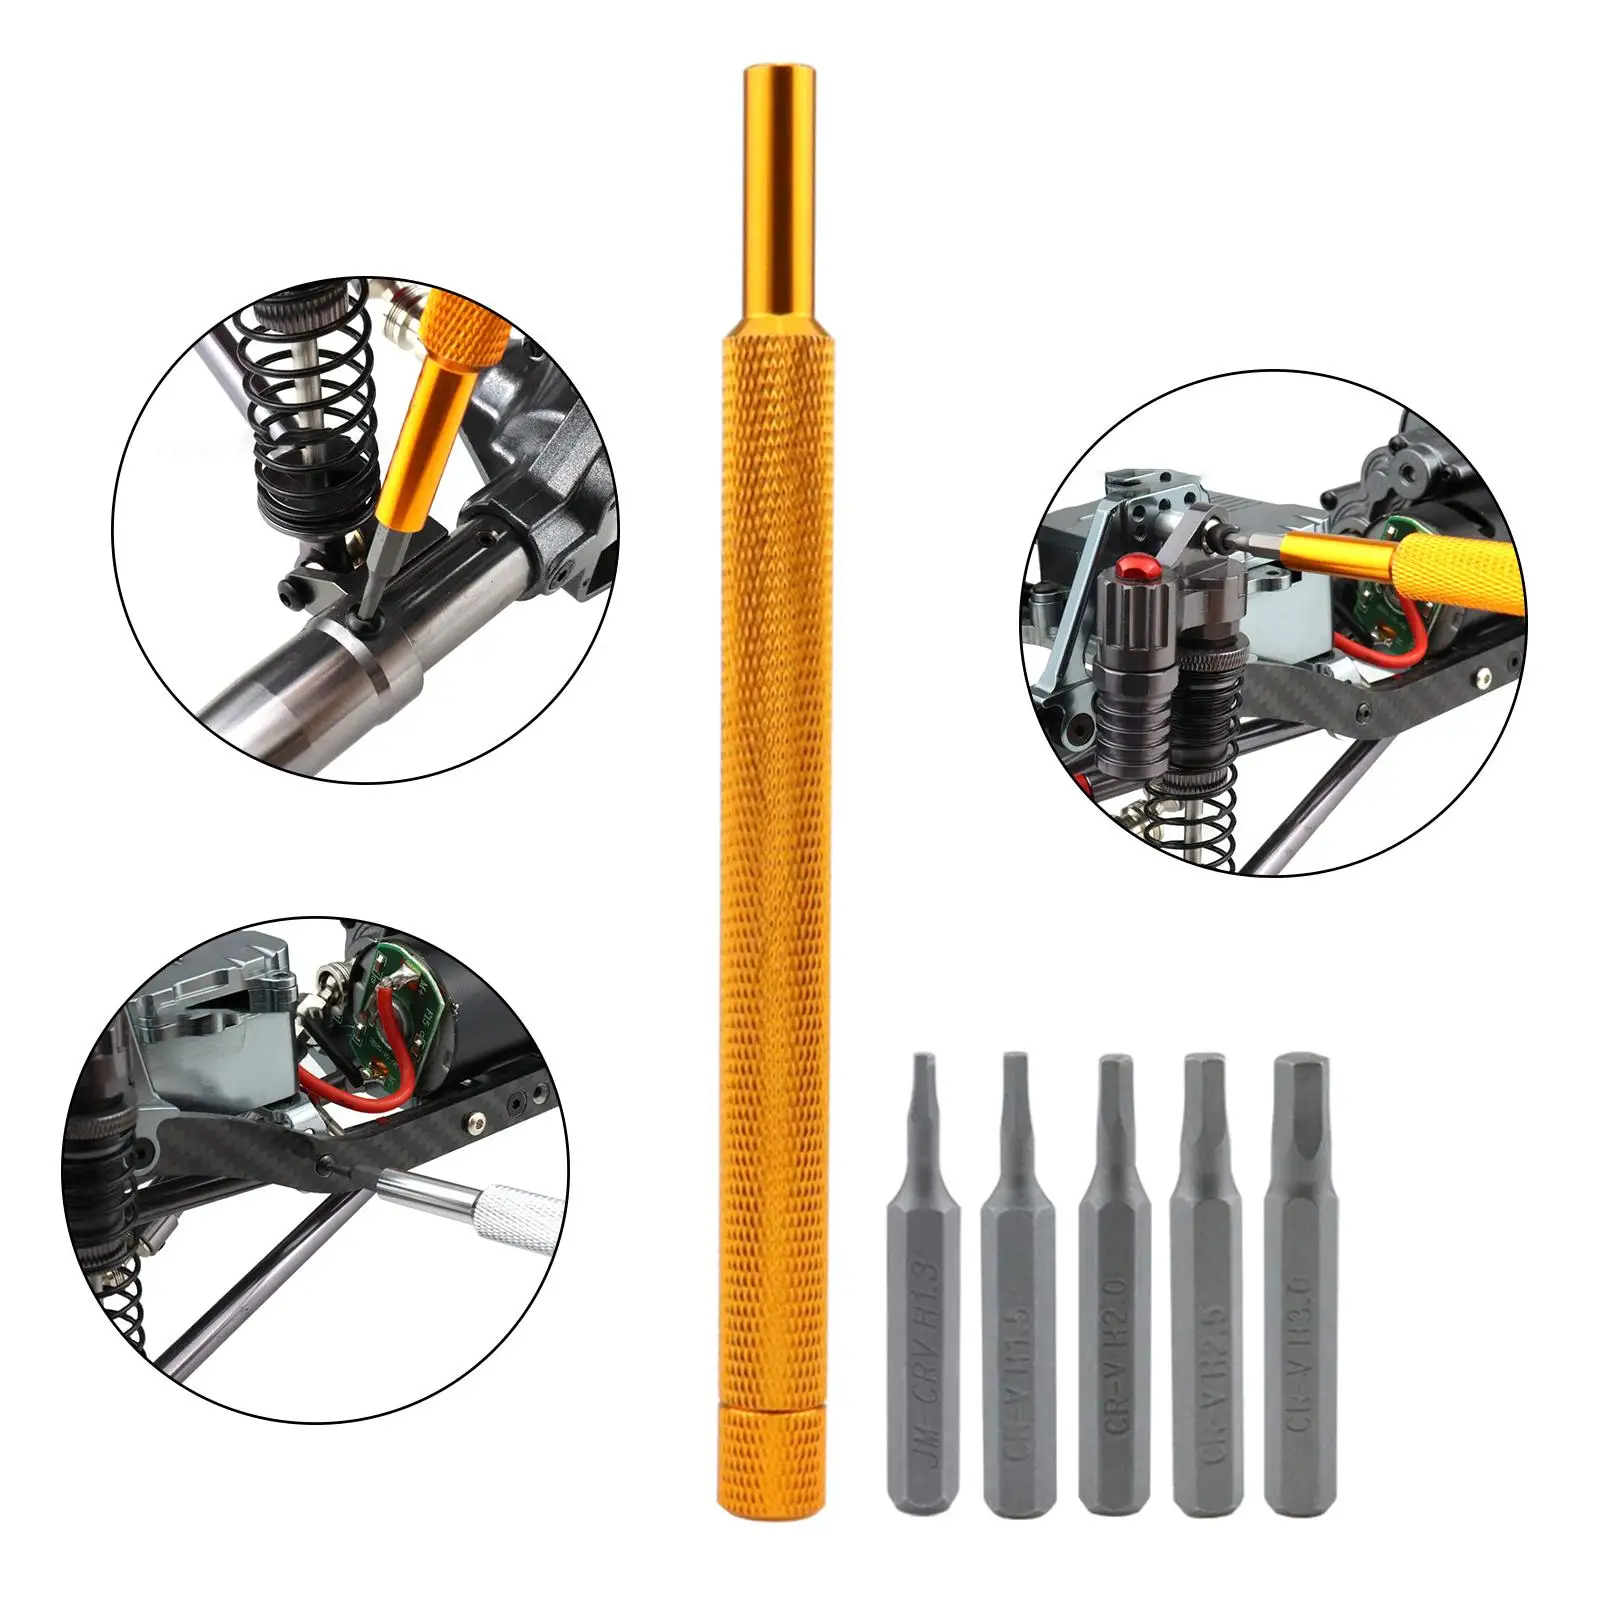 6Pcs Screw Driver Tools Kit Set RC Repair Tools Kit with 1.3mm 1.5mm 2.0mm 2.5mm 3.0mm Bits for RC Boat Boat Parts